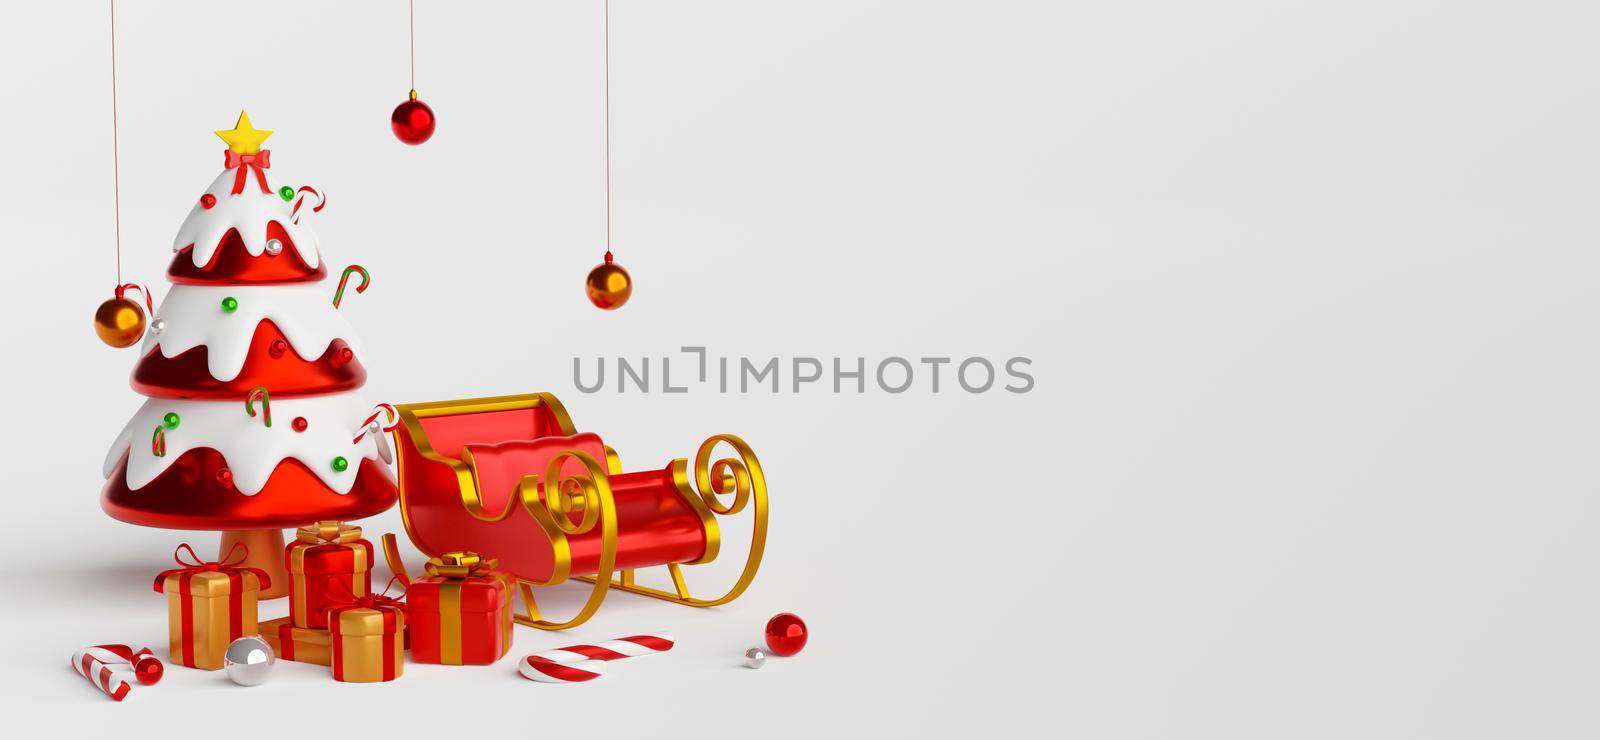 Scene of Christmas tree with sleigh and Xmas presents, 3d illustration